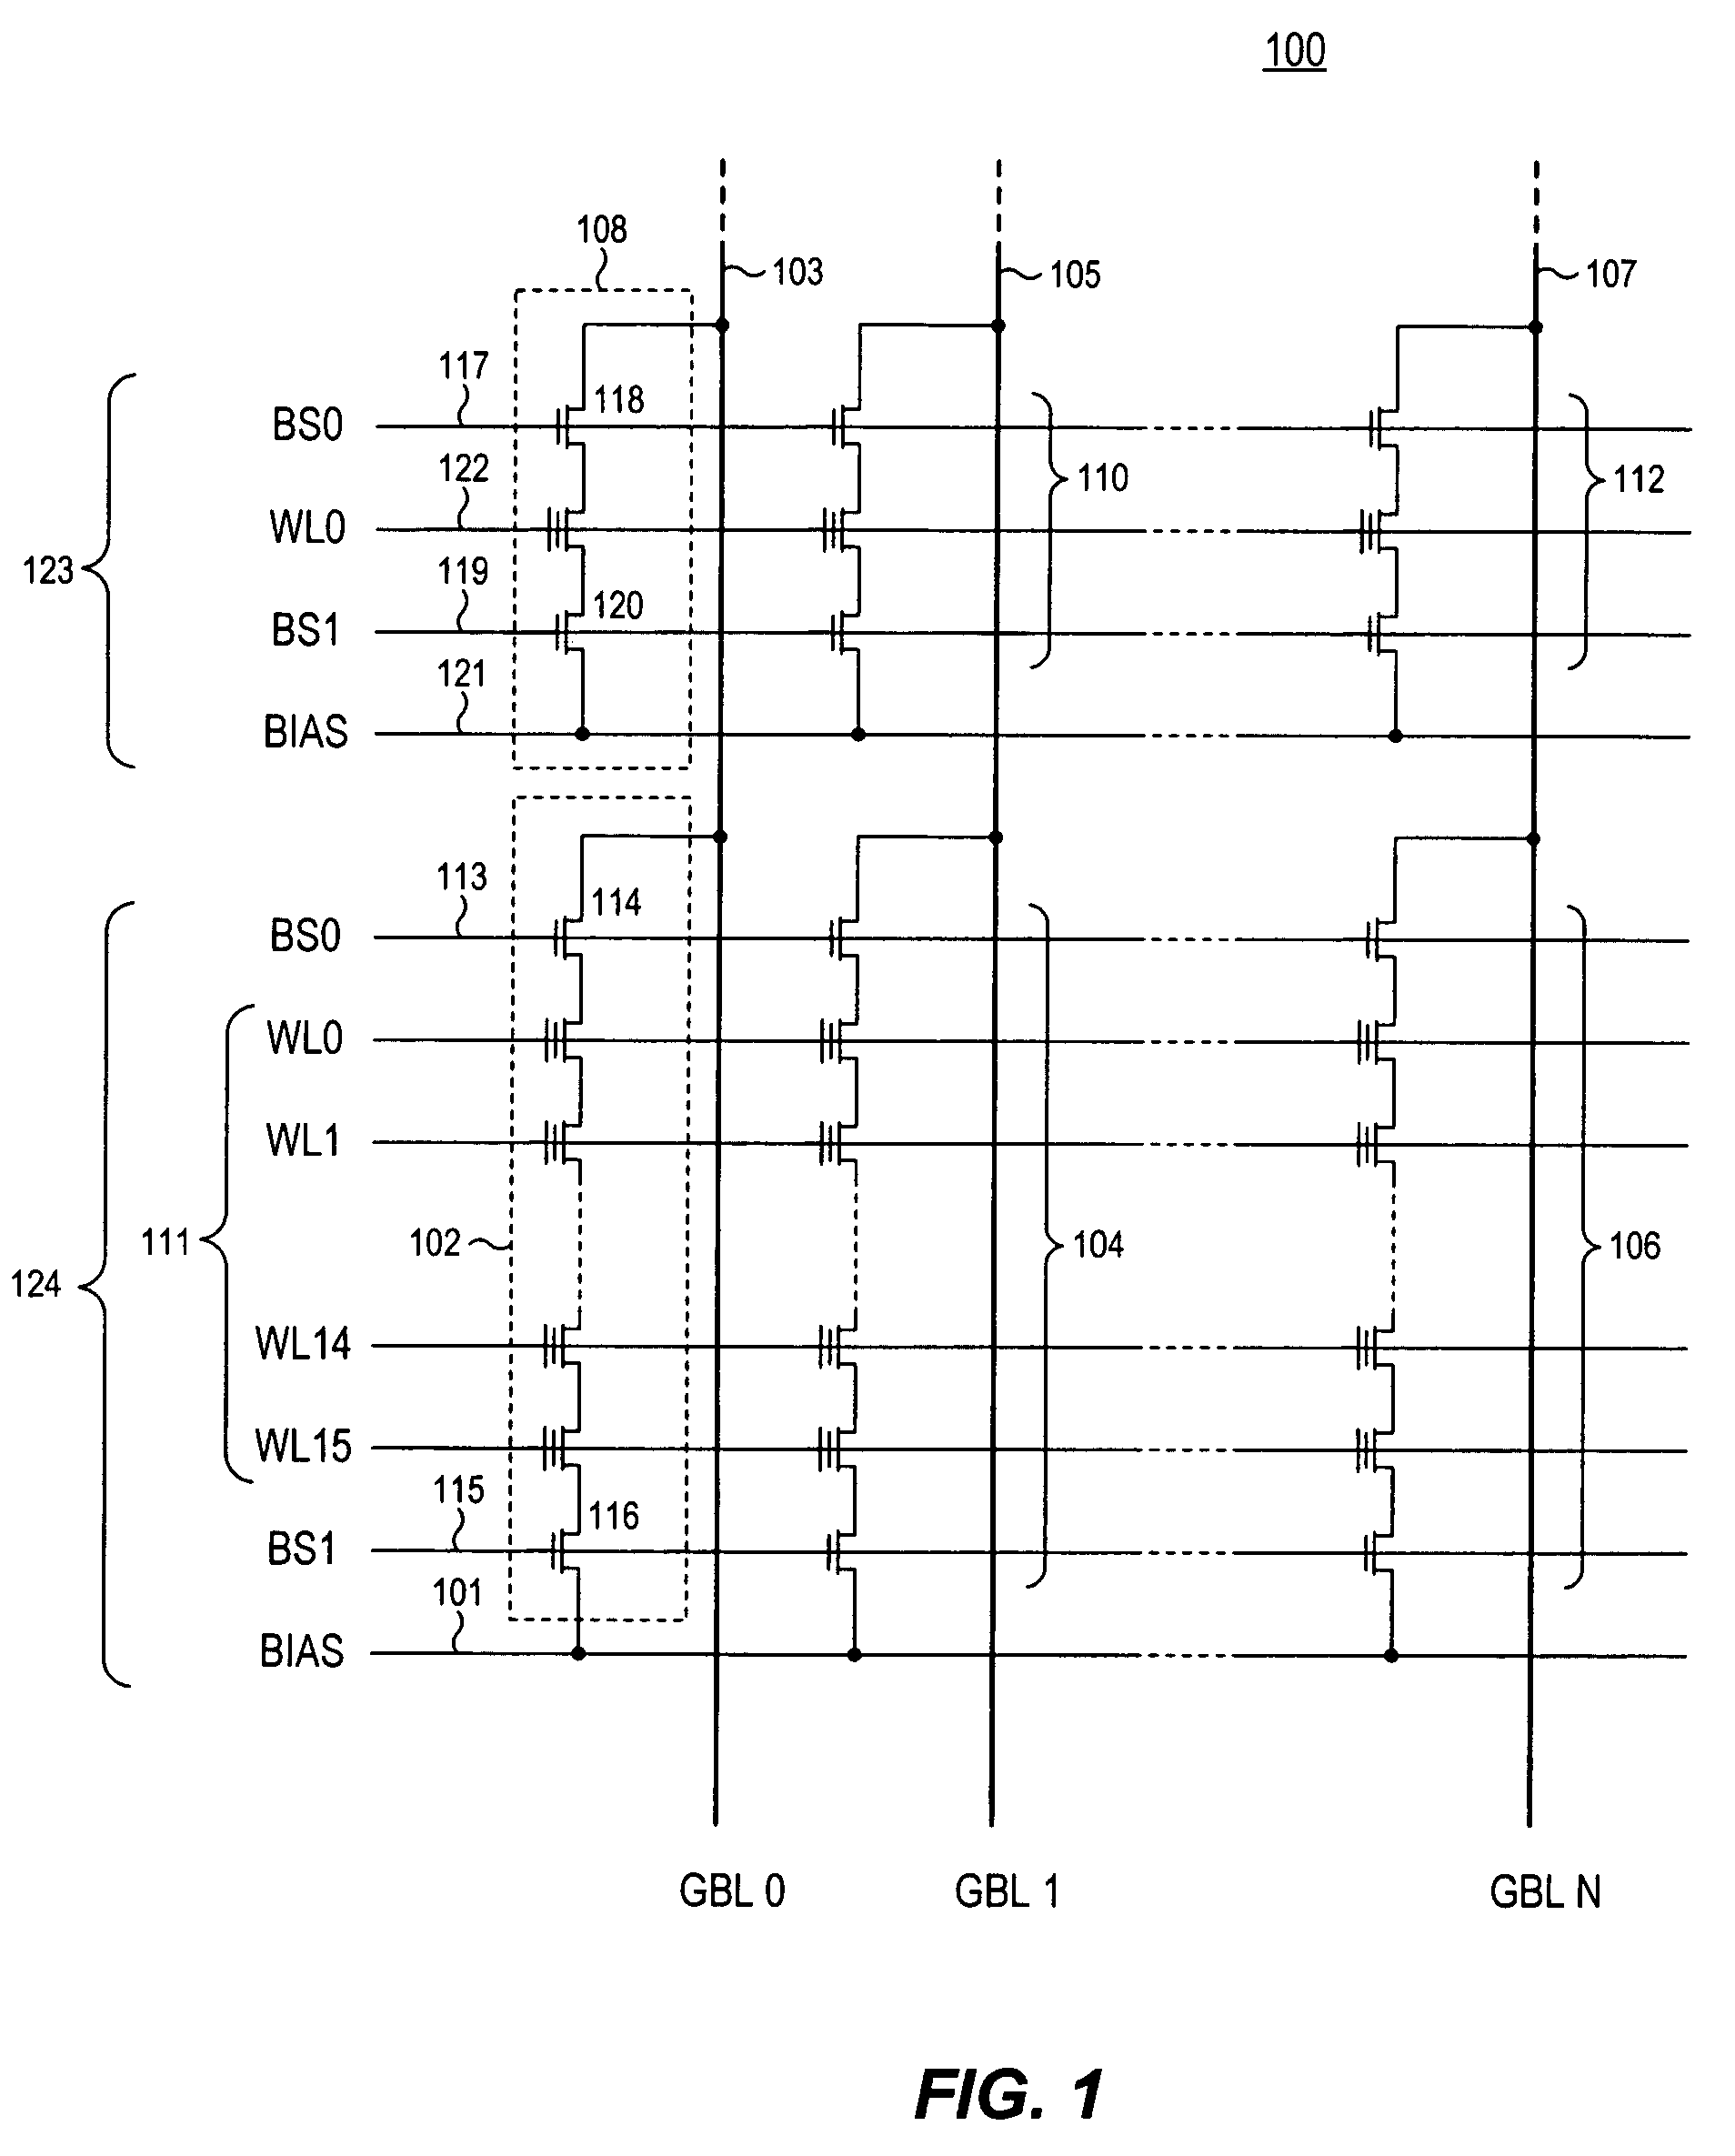 Integrated circuit including memory array incorporating multiple types of NAND string structures